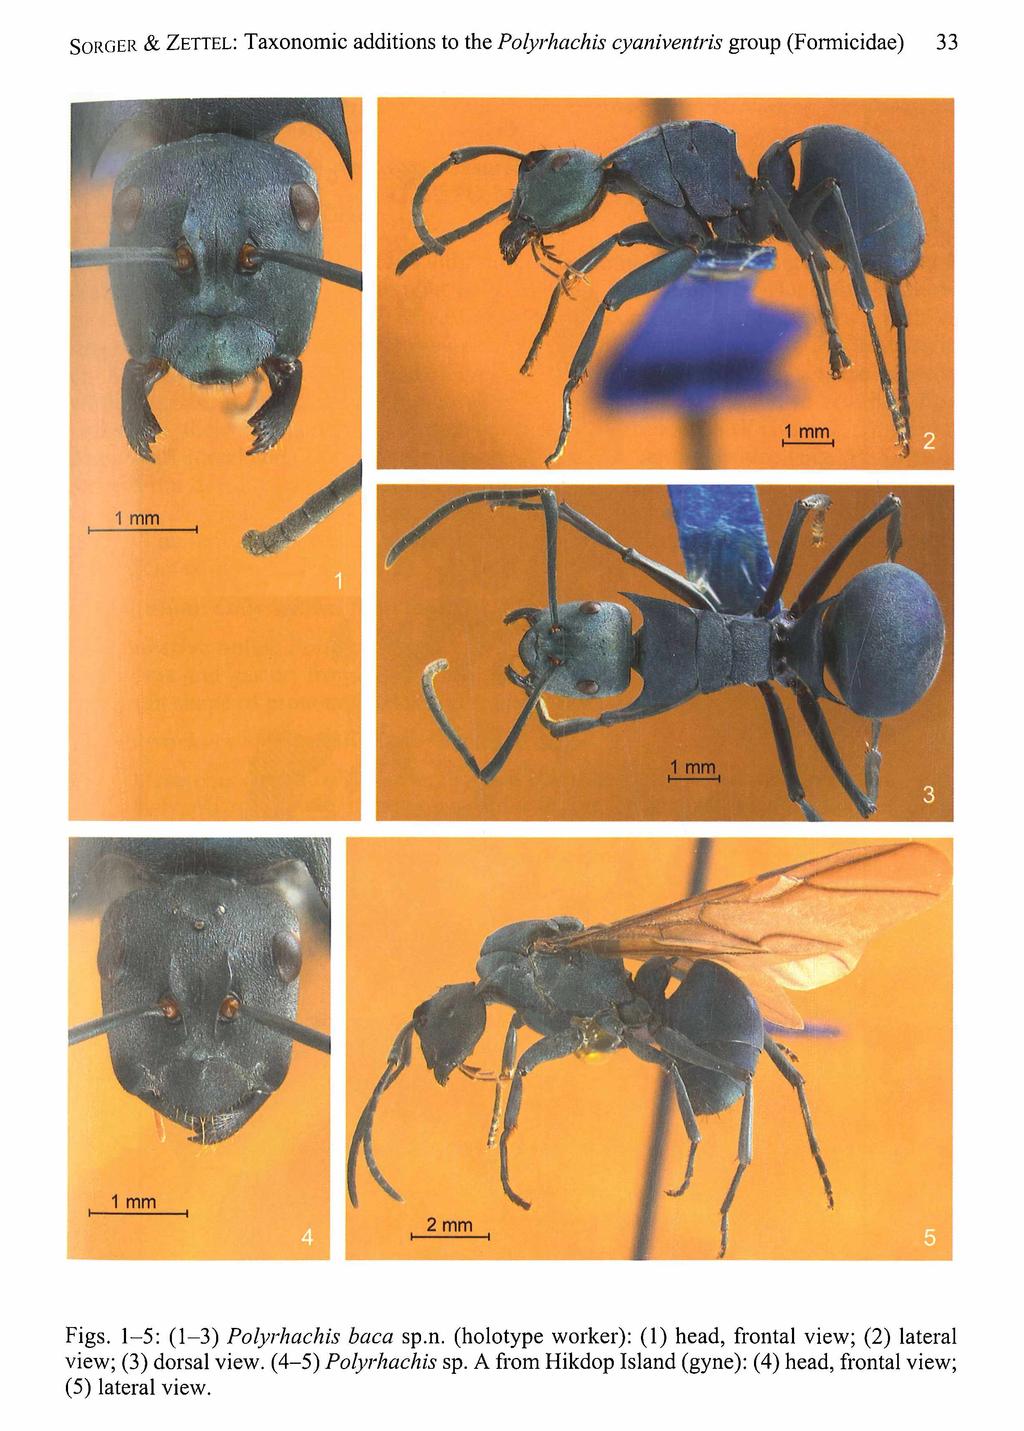 S o r g e r & Z ettel: Taxonomic additions to the Polyrhachis cyaniventris group (Formicidae) 33 Figs. 1-5: (1-3) Polyrhachis baca sp.n. (holotype worker): (1) head, frontal view; (2) lateral view; (3) dorsal view.